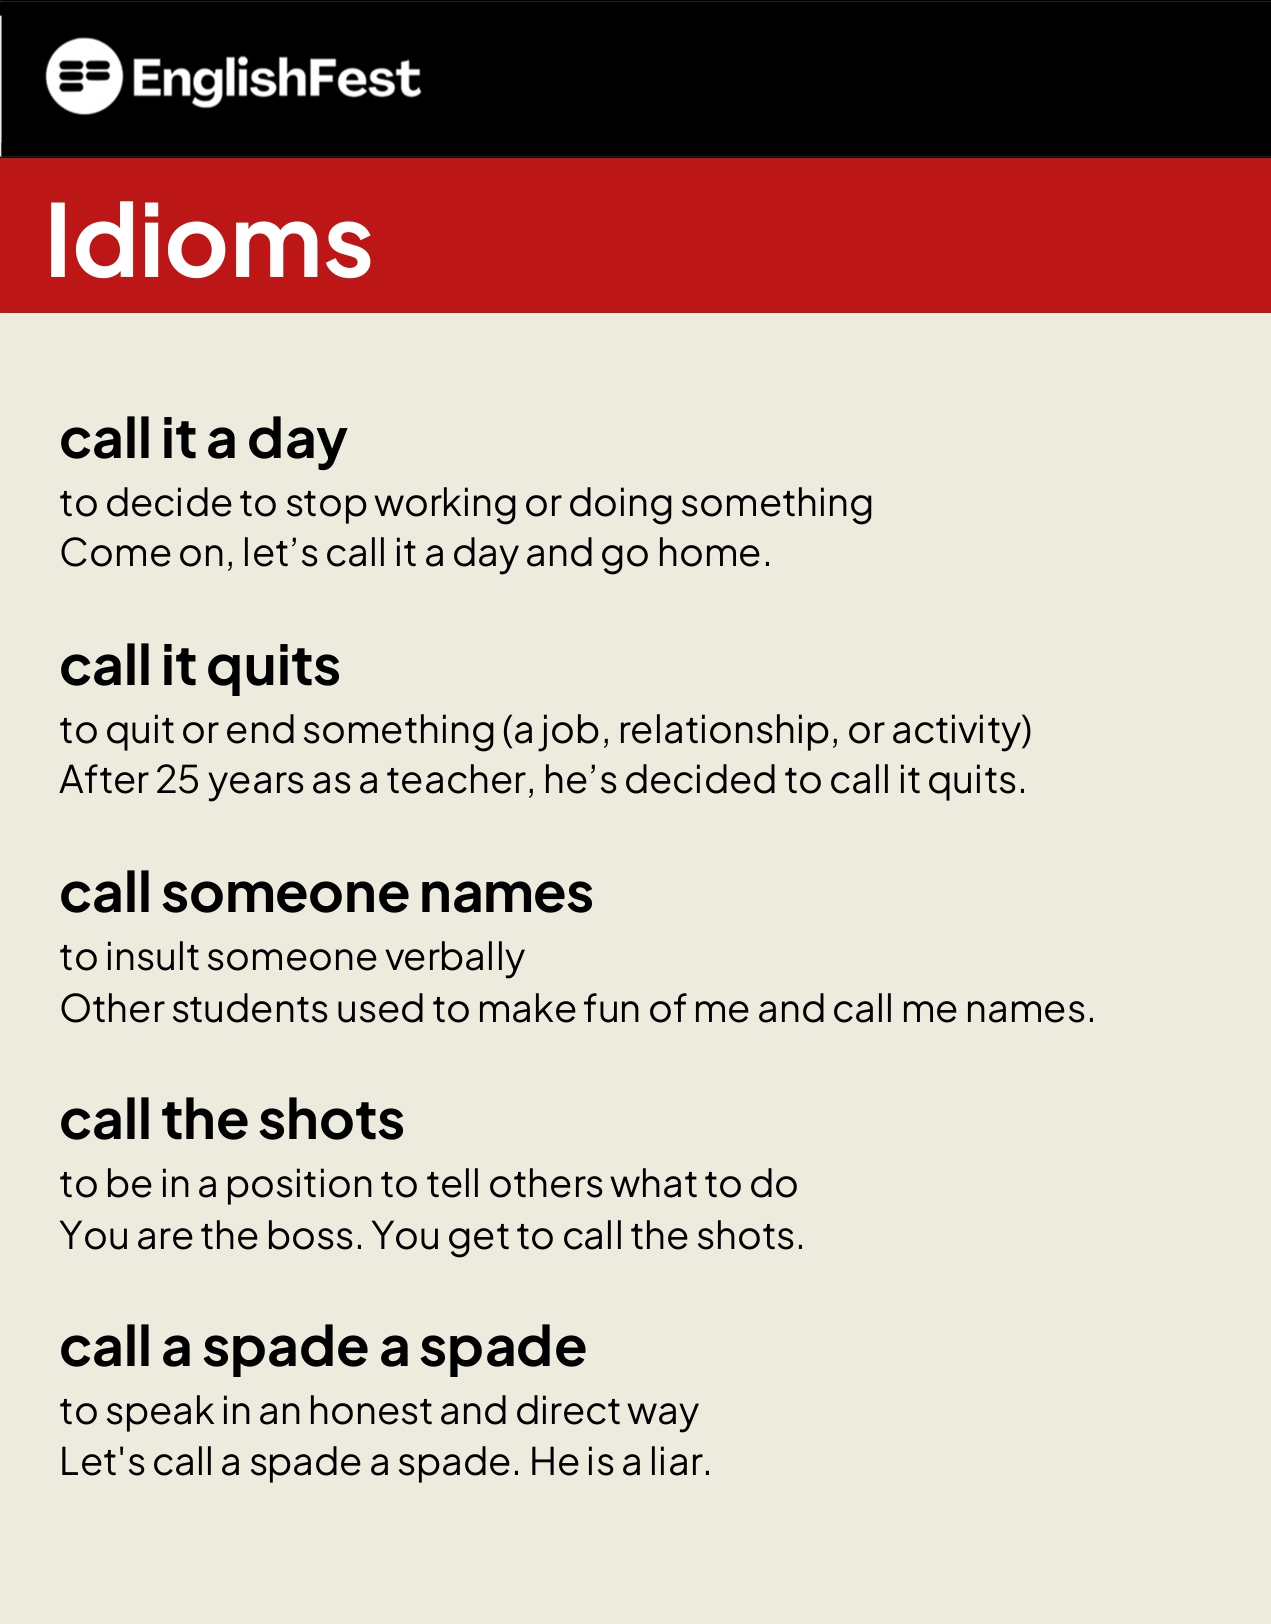 Two idioms in one: call it a day and call it a night